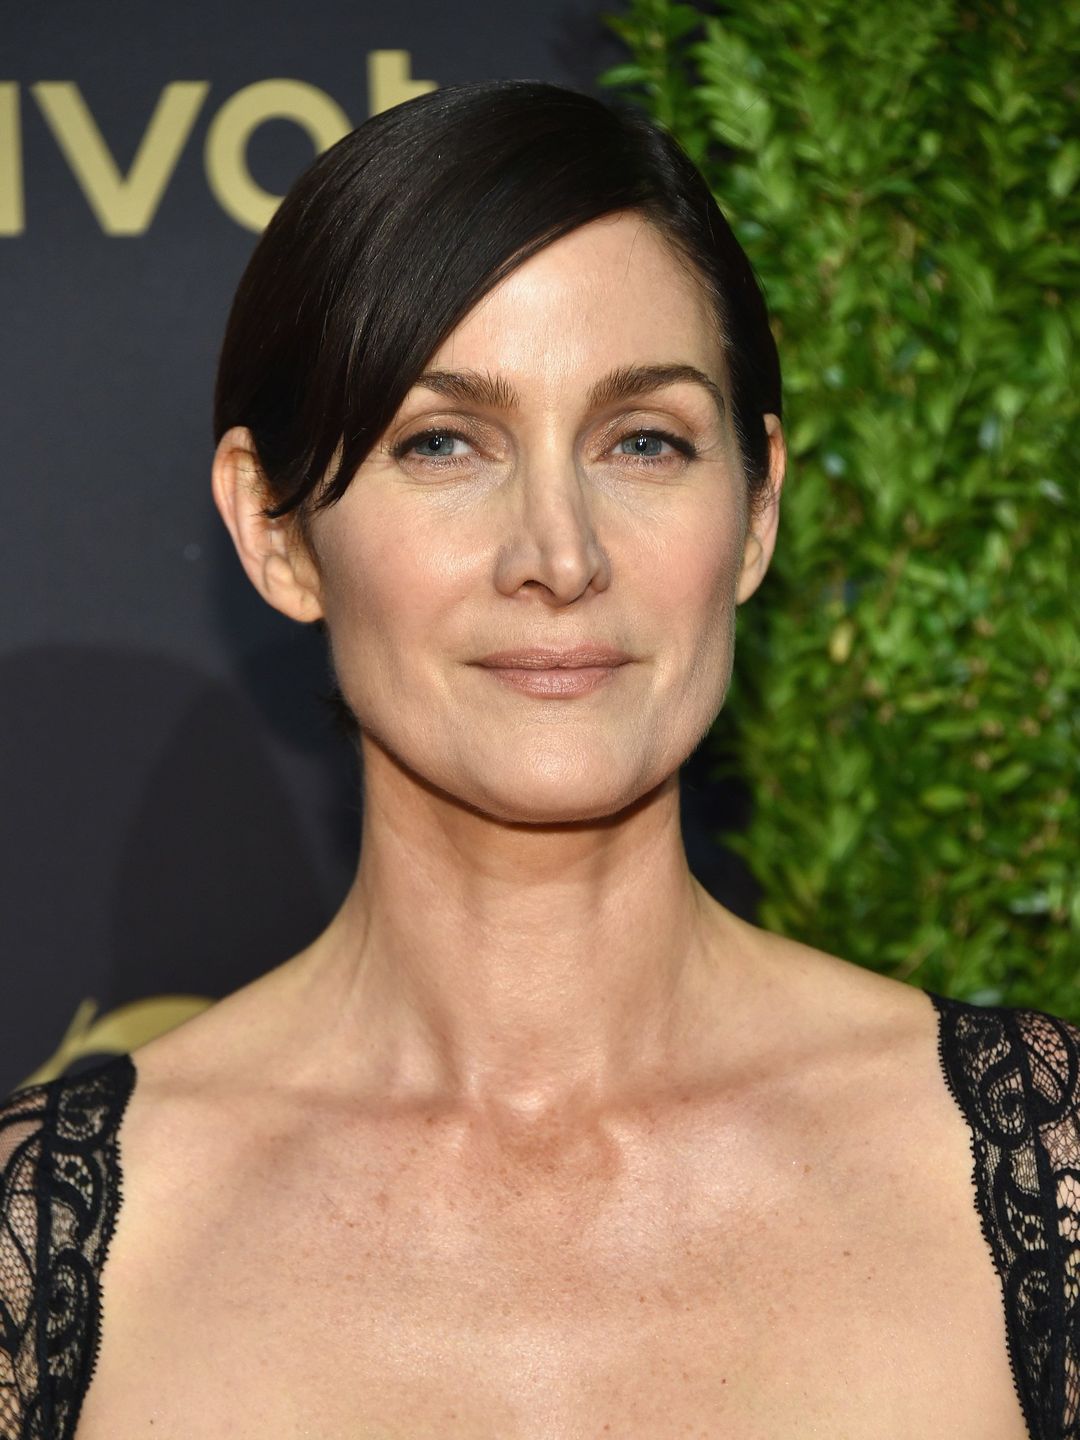 Carrie-Anne Moss young age